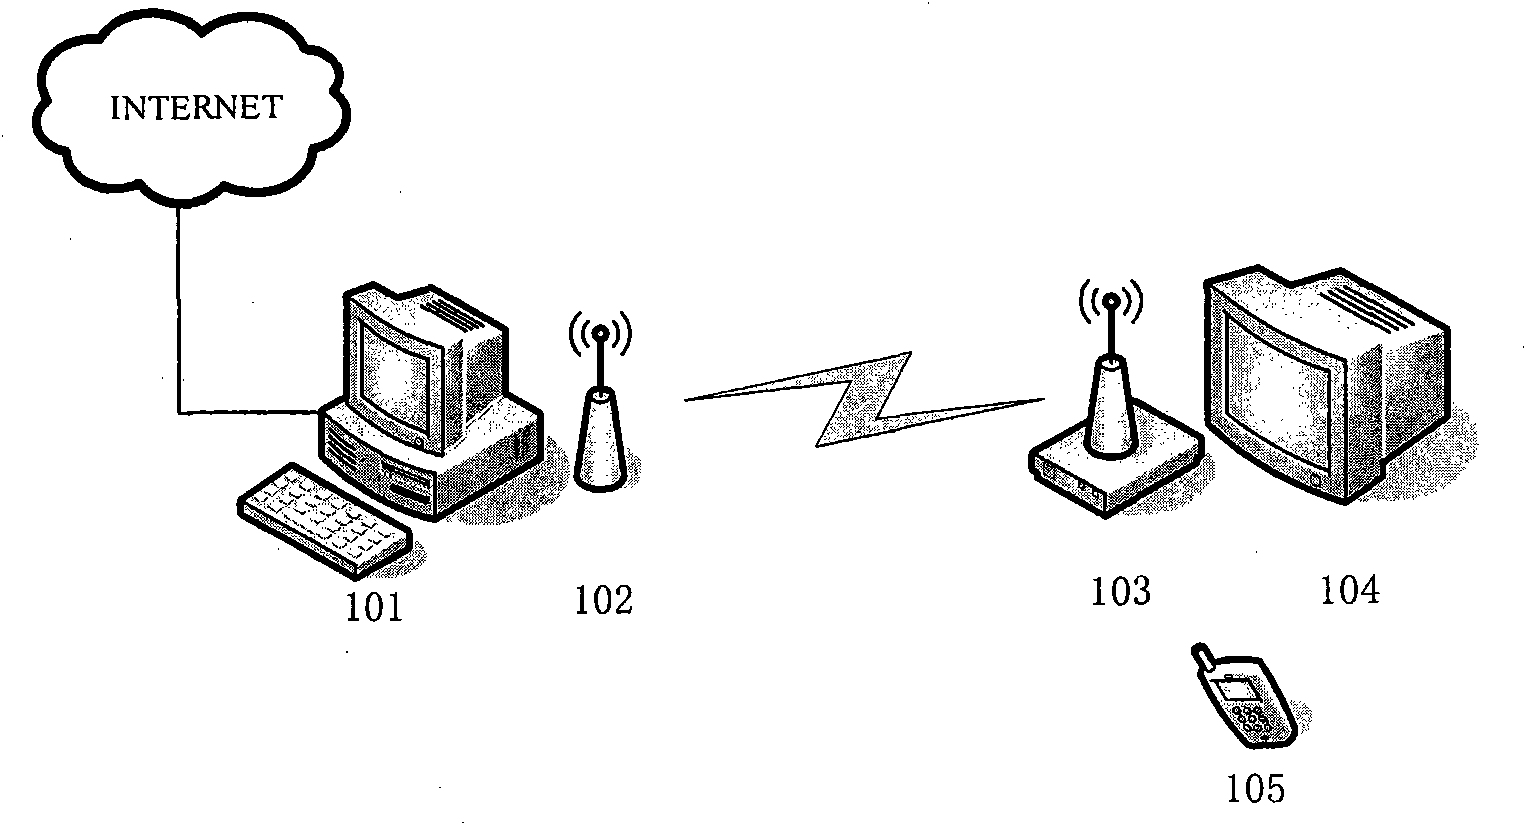 System and method for wireless transmission of audio and video signals